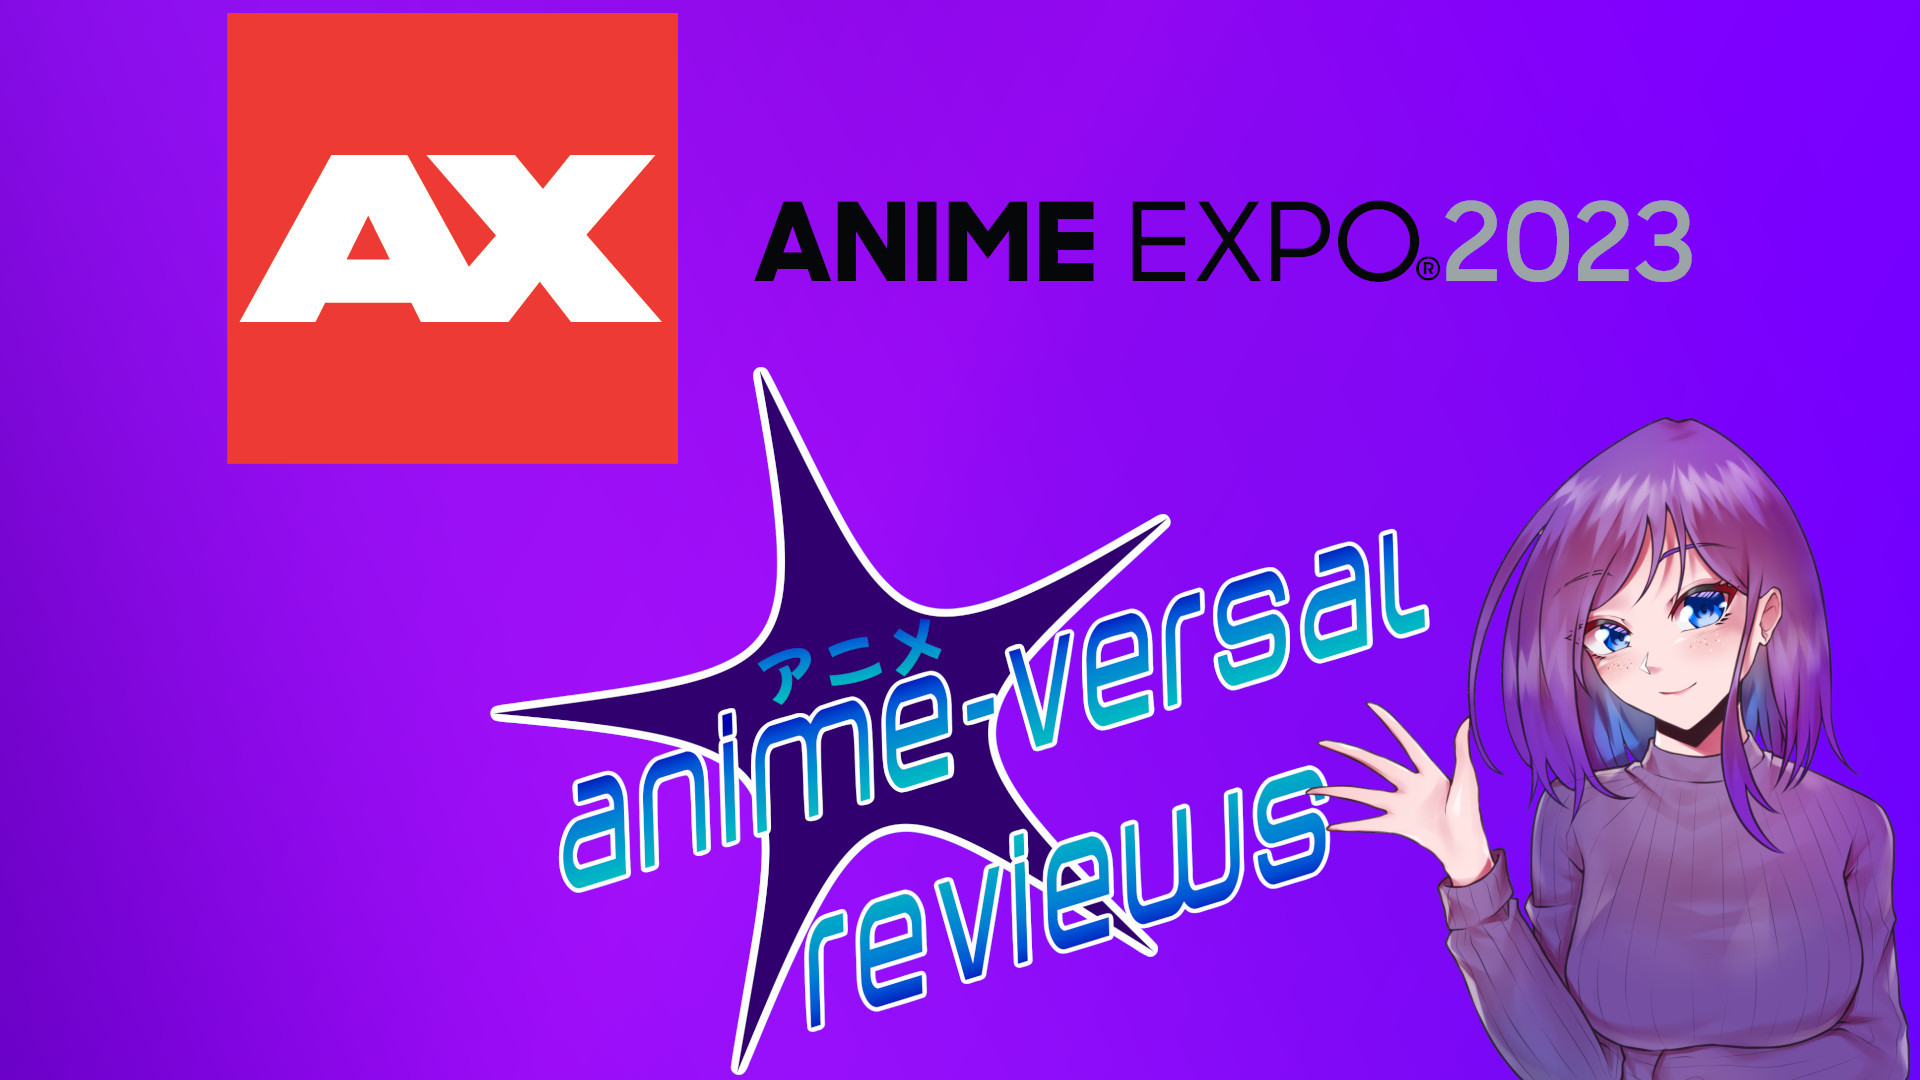 Don’t Miss AVR’s Parenting And Anime Panel At Anime Expo 2023!!!